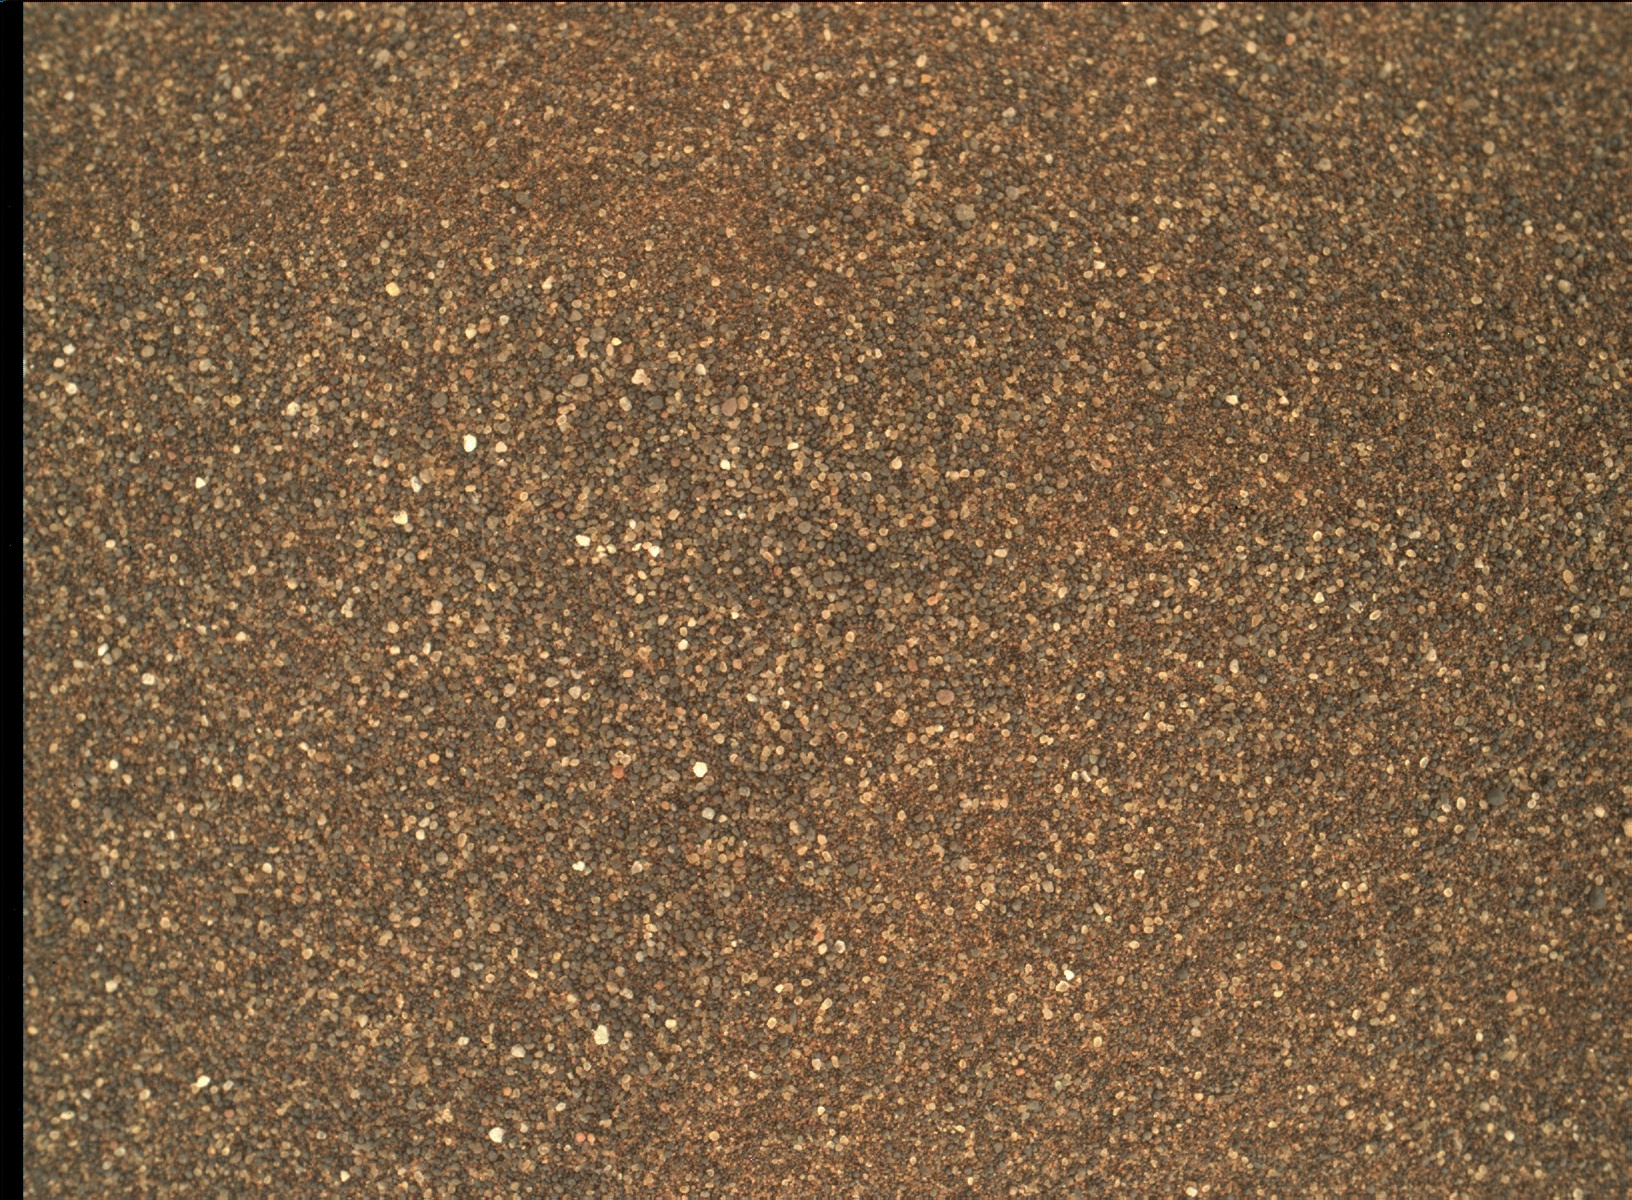 Nasa's Mars rover Curiosity acquired this image using its Mars Hand Lens Imager (MAHLI) on Sol 1650